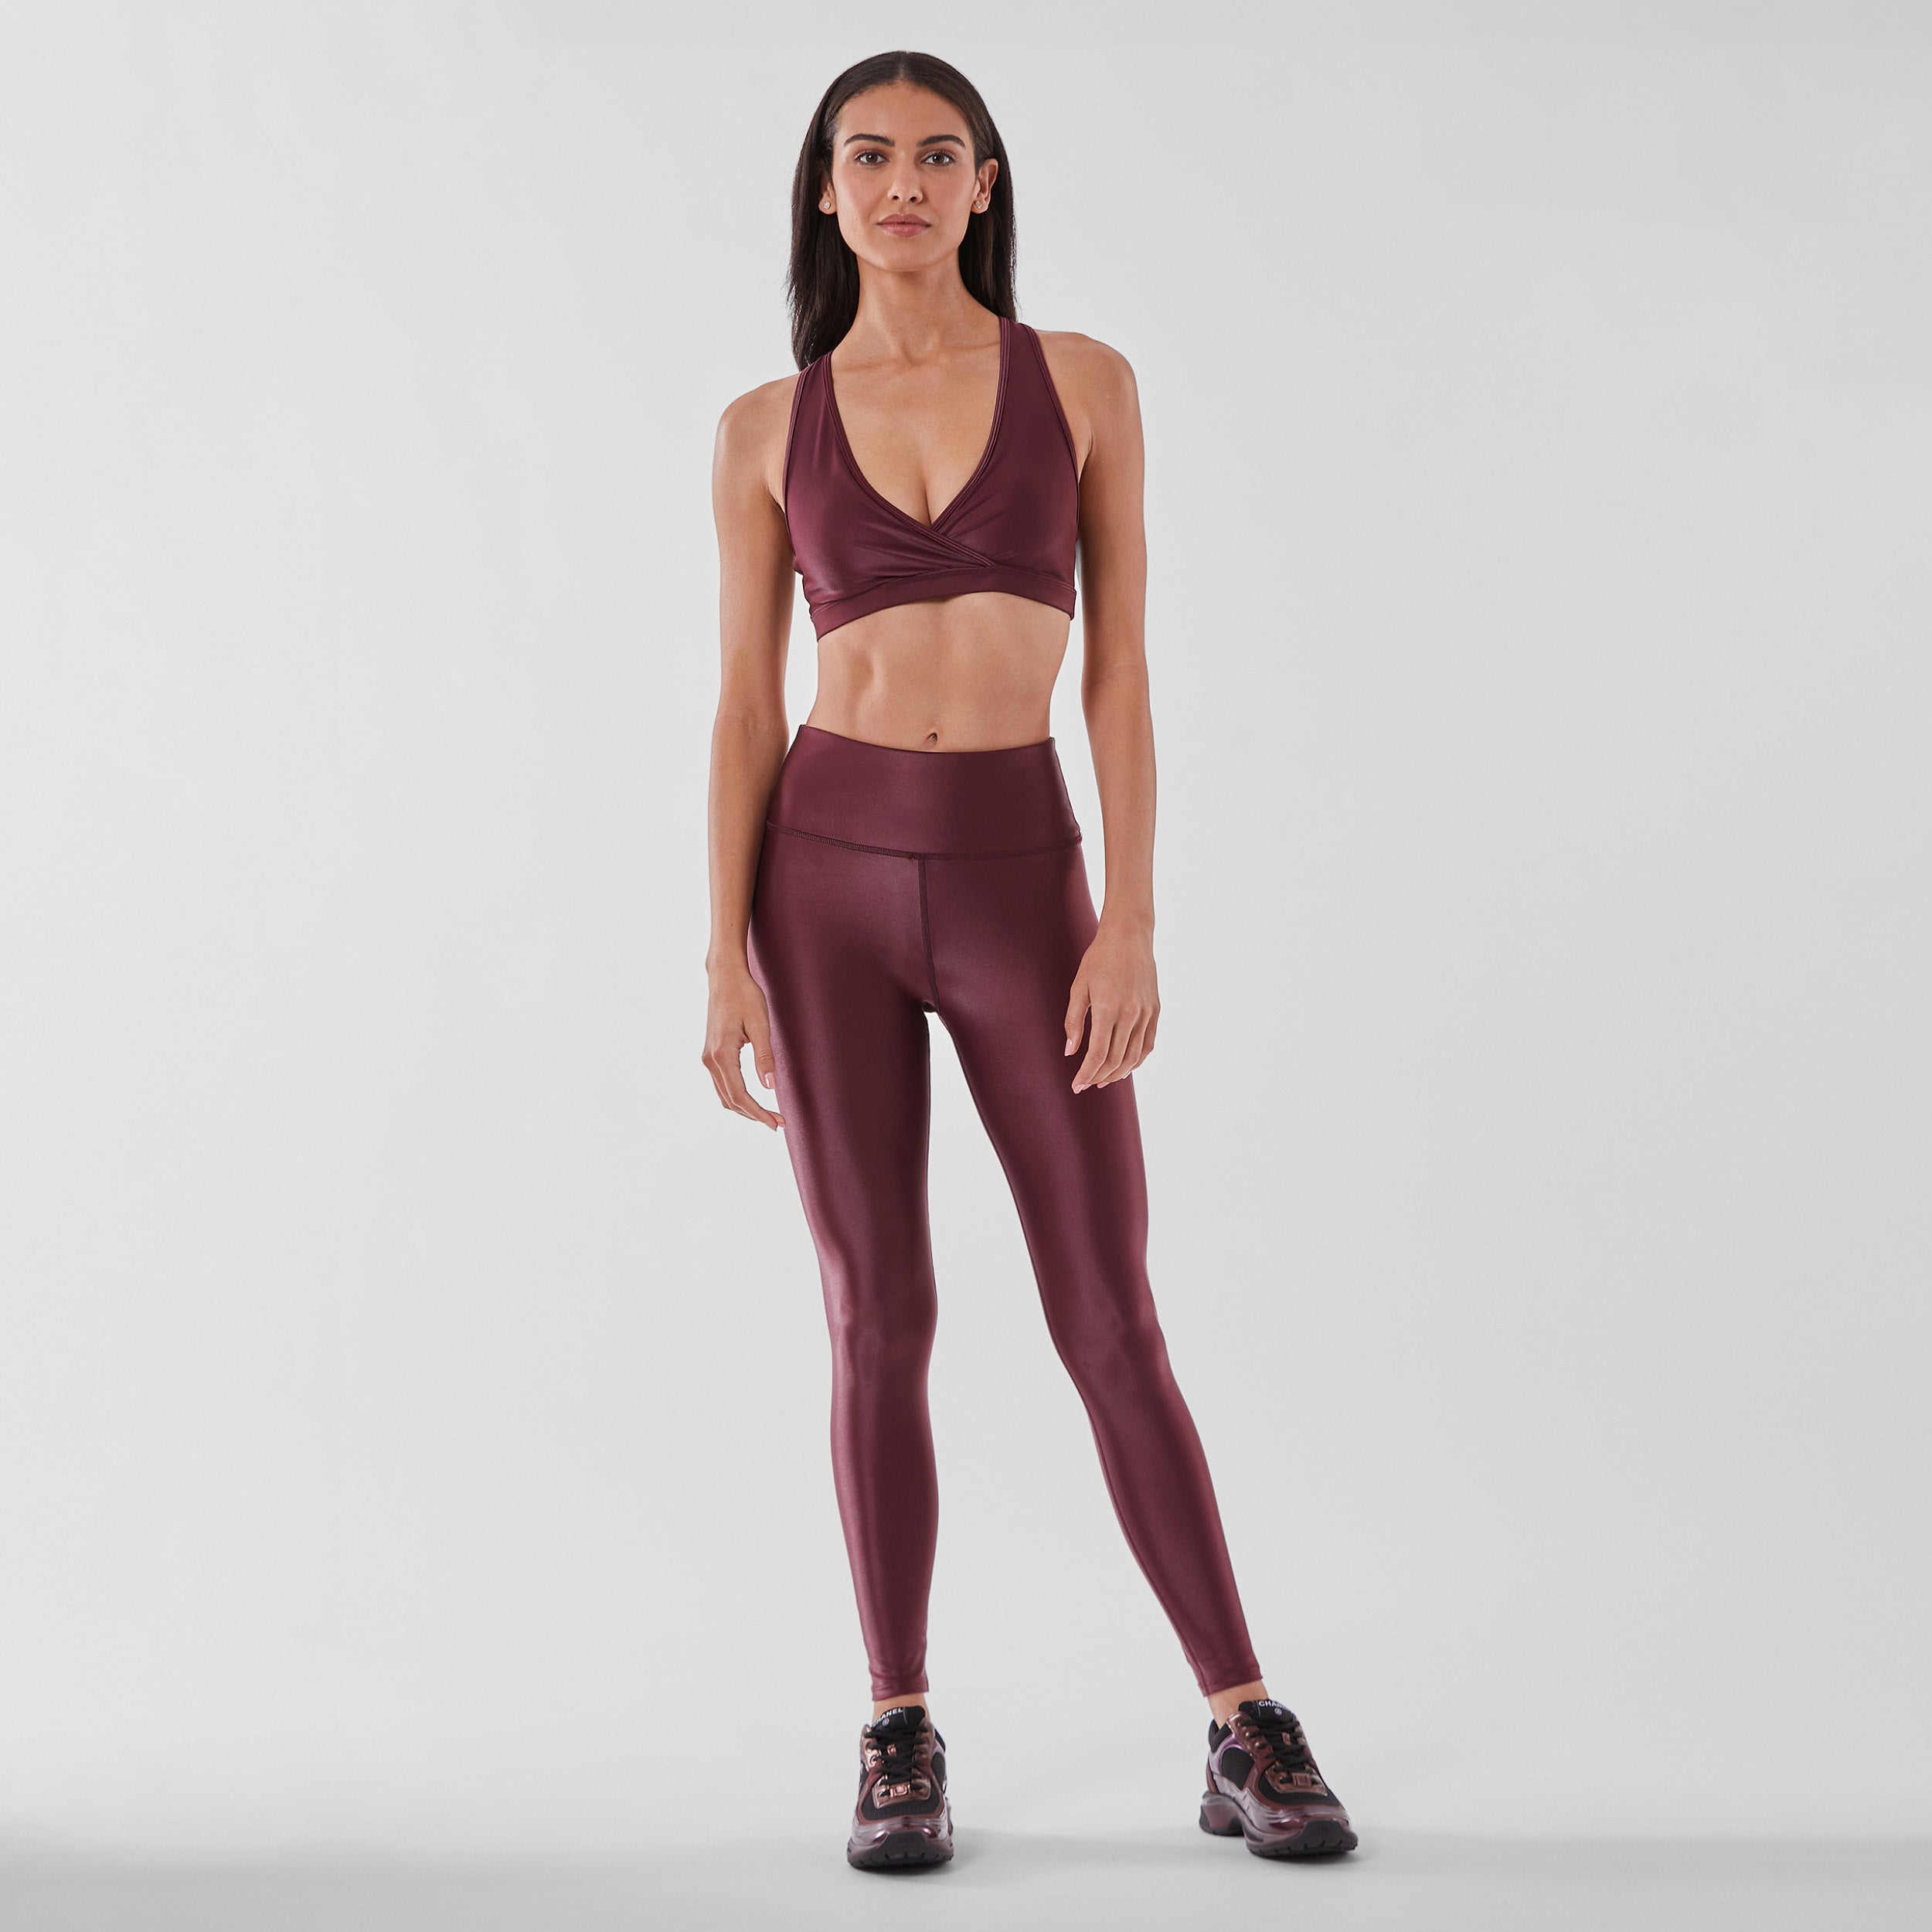 Full body view of woman wearing sleek and supportive dark red colored v-neck bra features lightweight and lustrous shine.